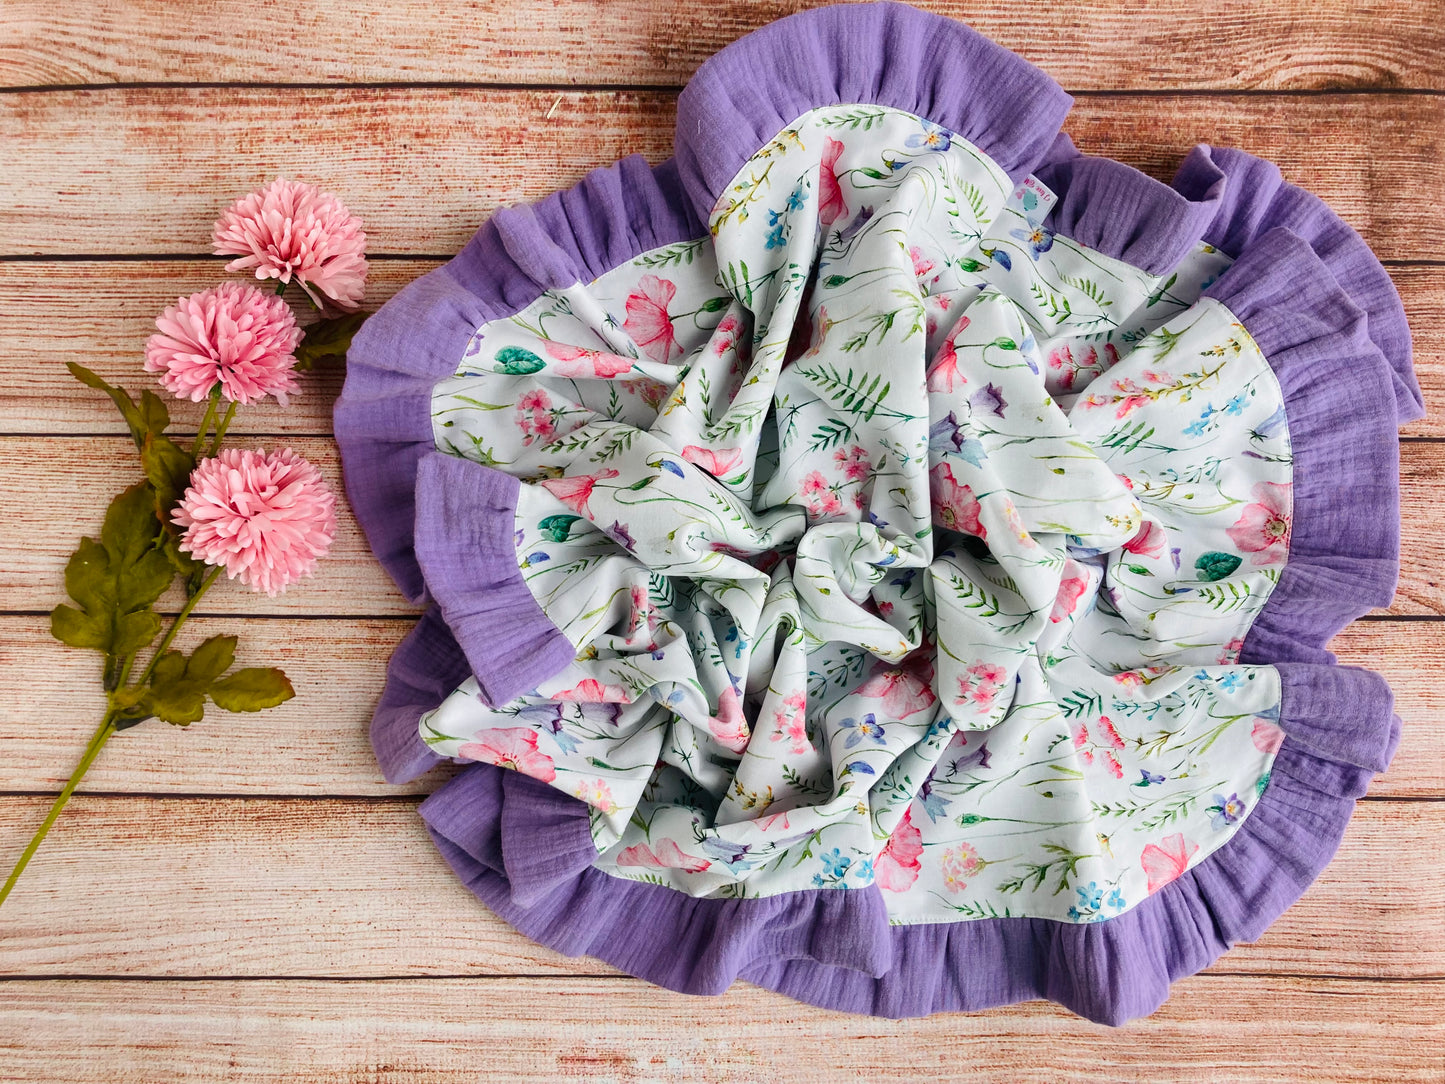 2 layer Muslin baby blanket with ruffles -  Meadows and lavender